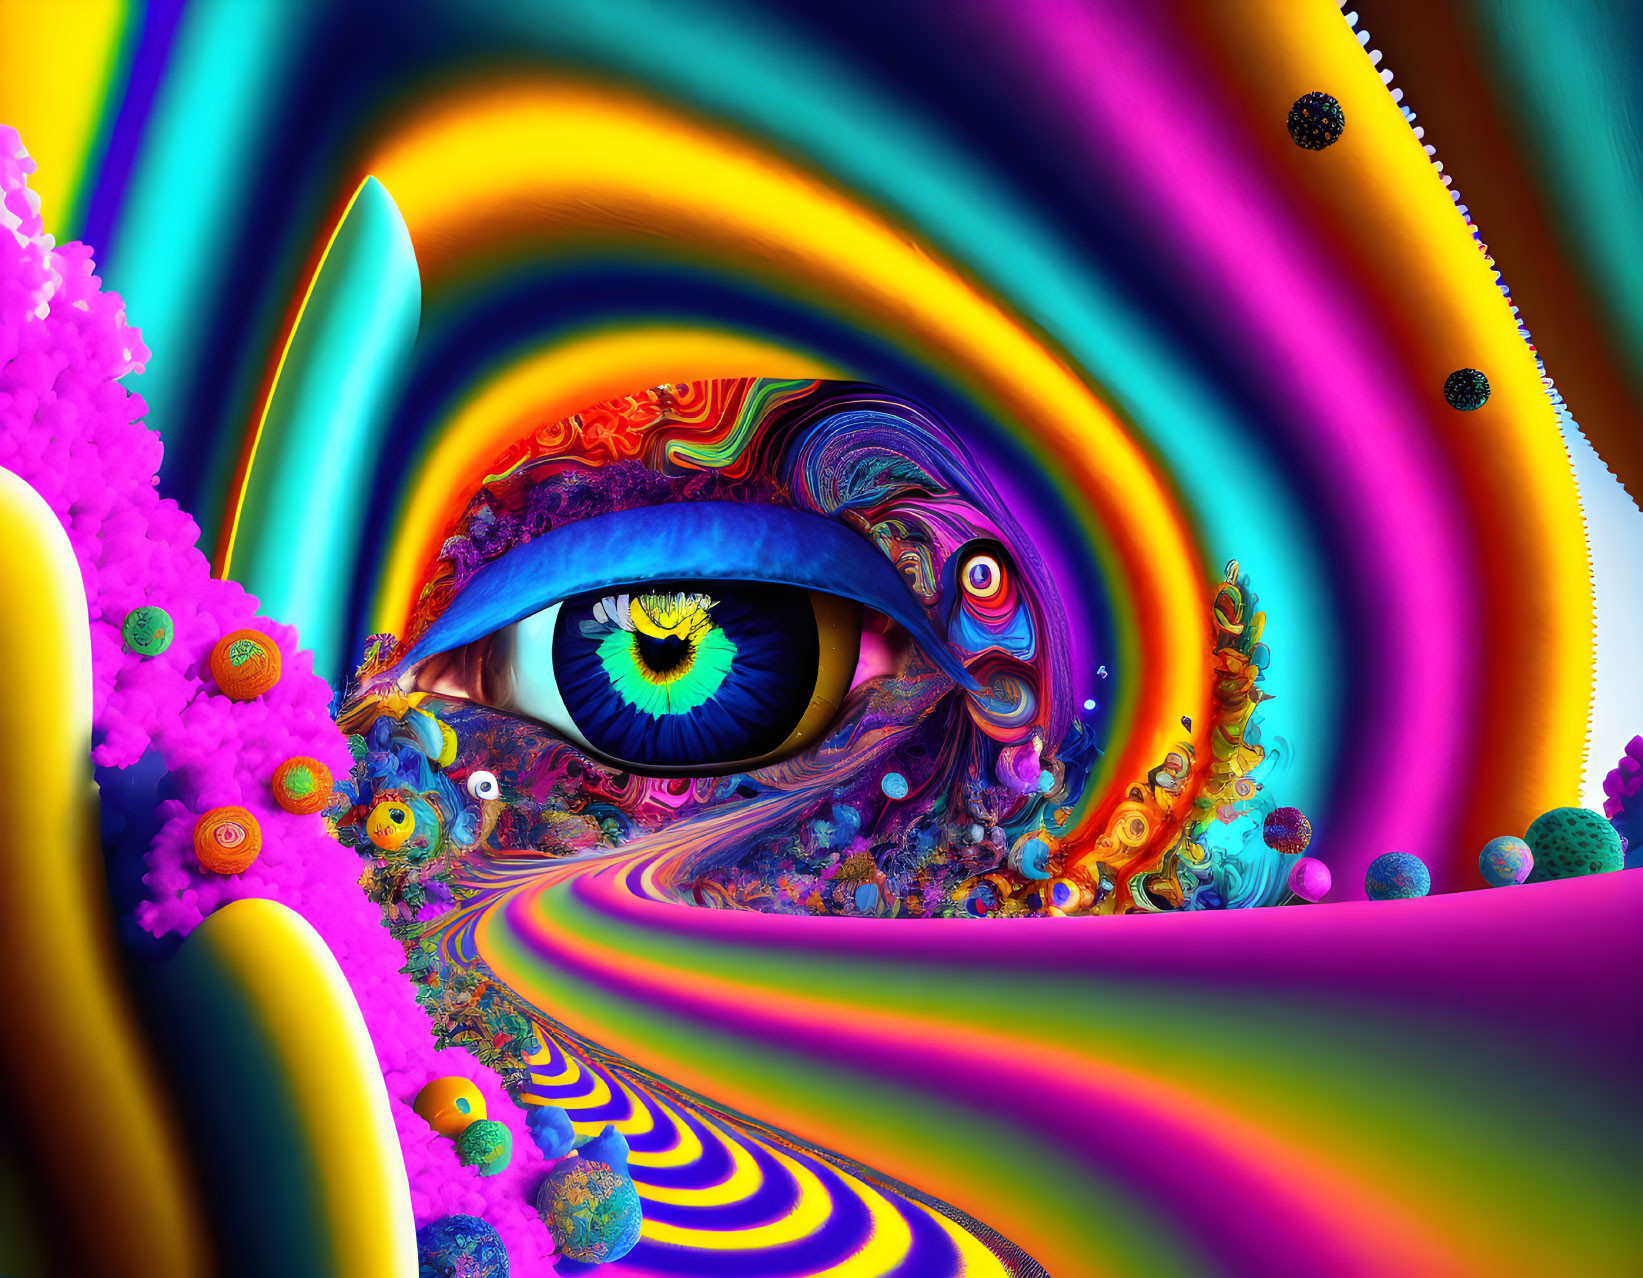 Colorful Abstract Art with Detailed Eye and Swirling Patterns